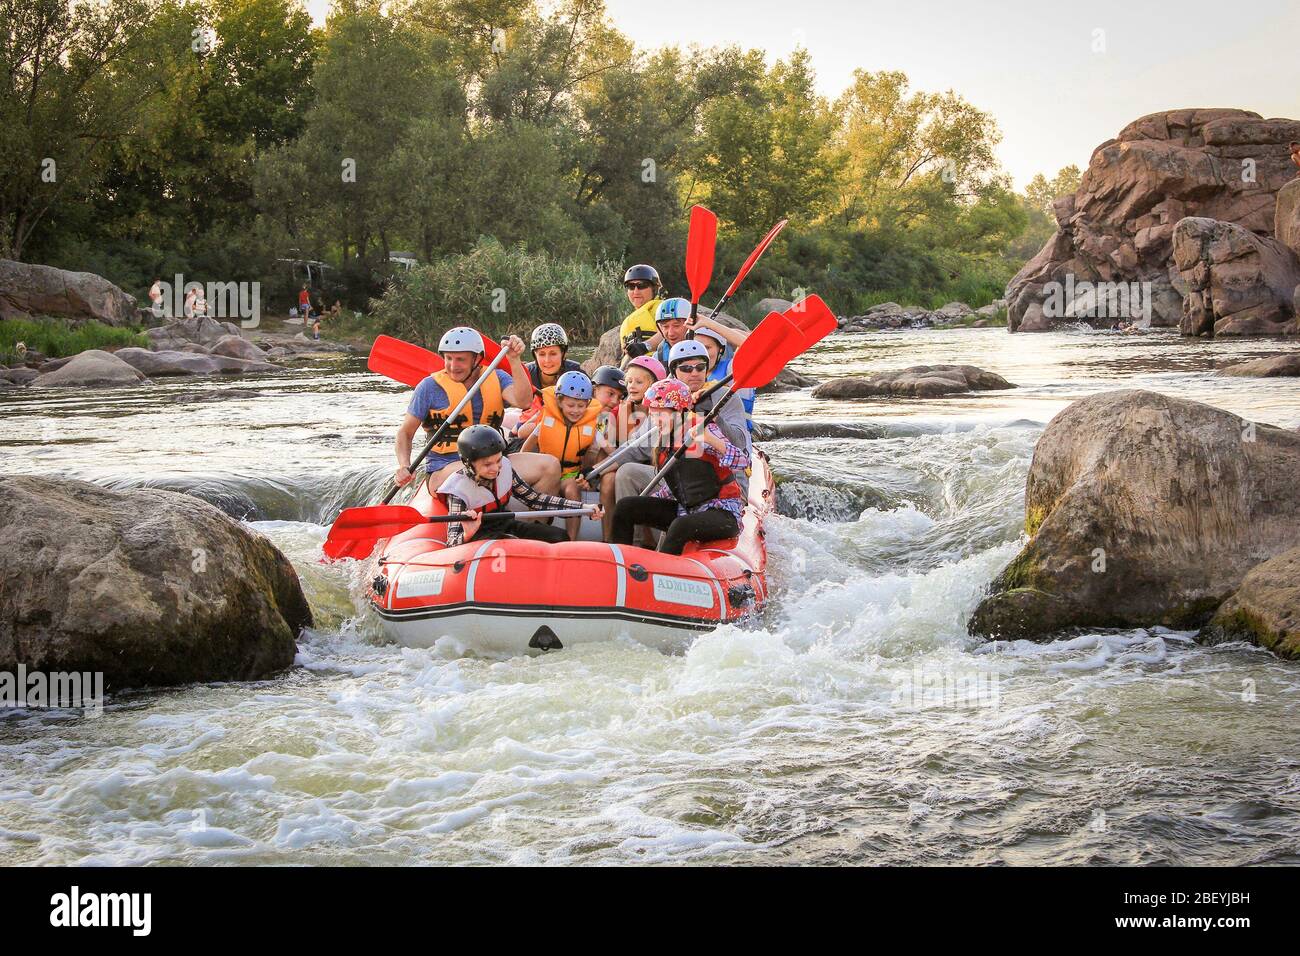 Sun Kosi near Harkapur / Nepal - August 30, 2019: Whitewater Rafting on the Dudh Koshi in Nepal. Rafting team , summer extreme water sport. Group of p Stock Photo